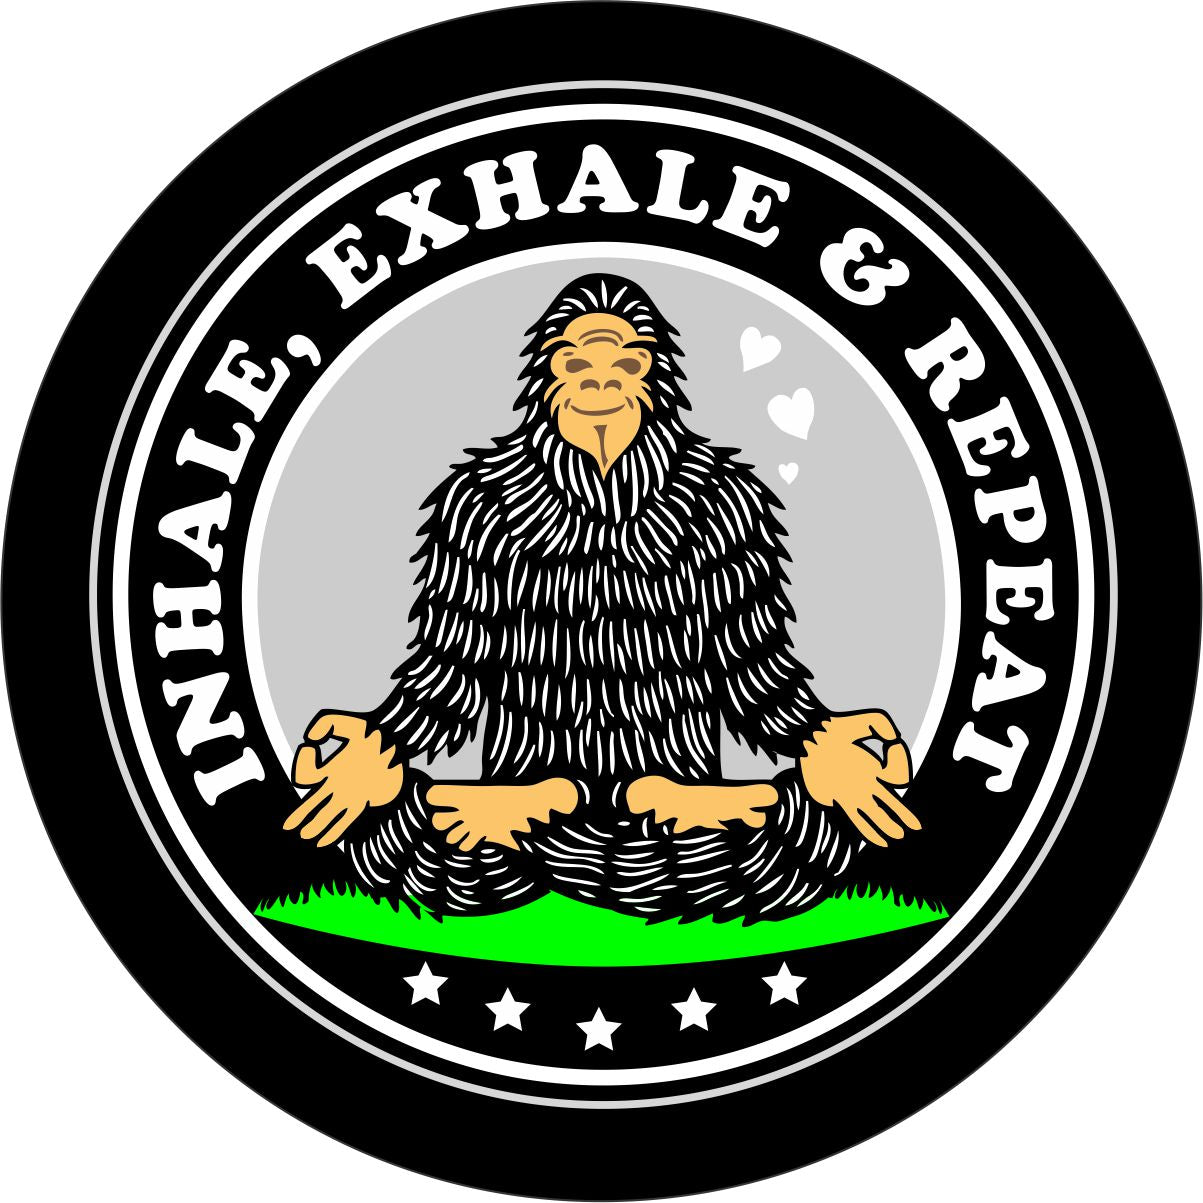 Sasquatch bigfoot taking some zen moments, meditating bigfoot doing inhale, exhale, repeat funny spare tire cover design for RV, Camper, Jeep, Bronco, etc. 